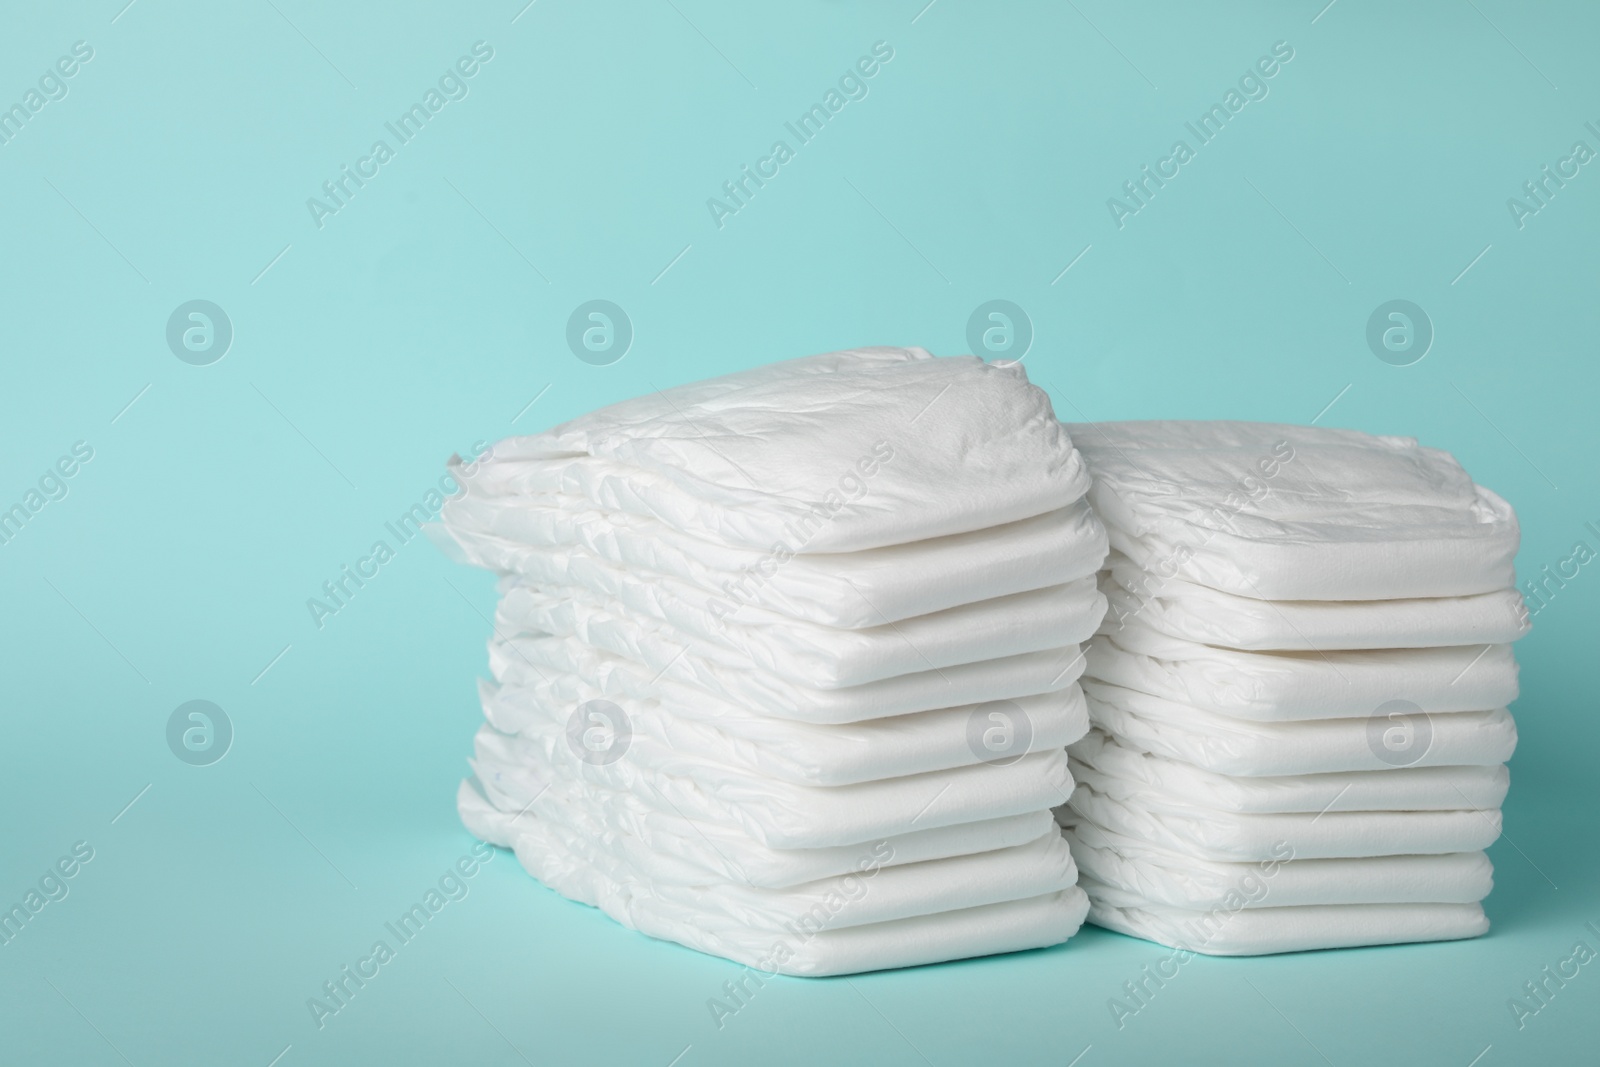 Photo of Stacks of diapers on light blue background